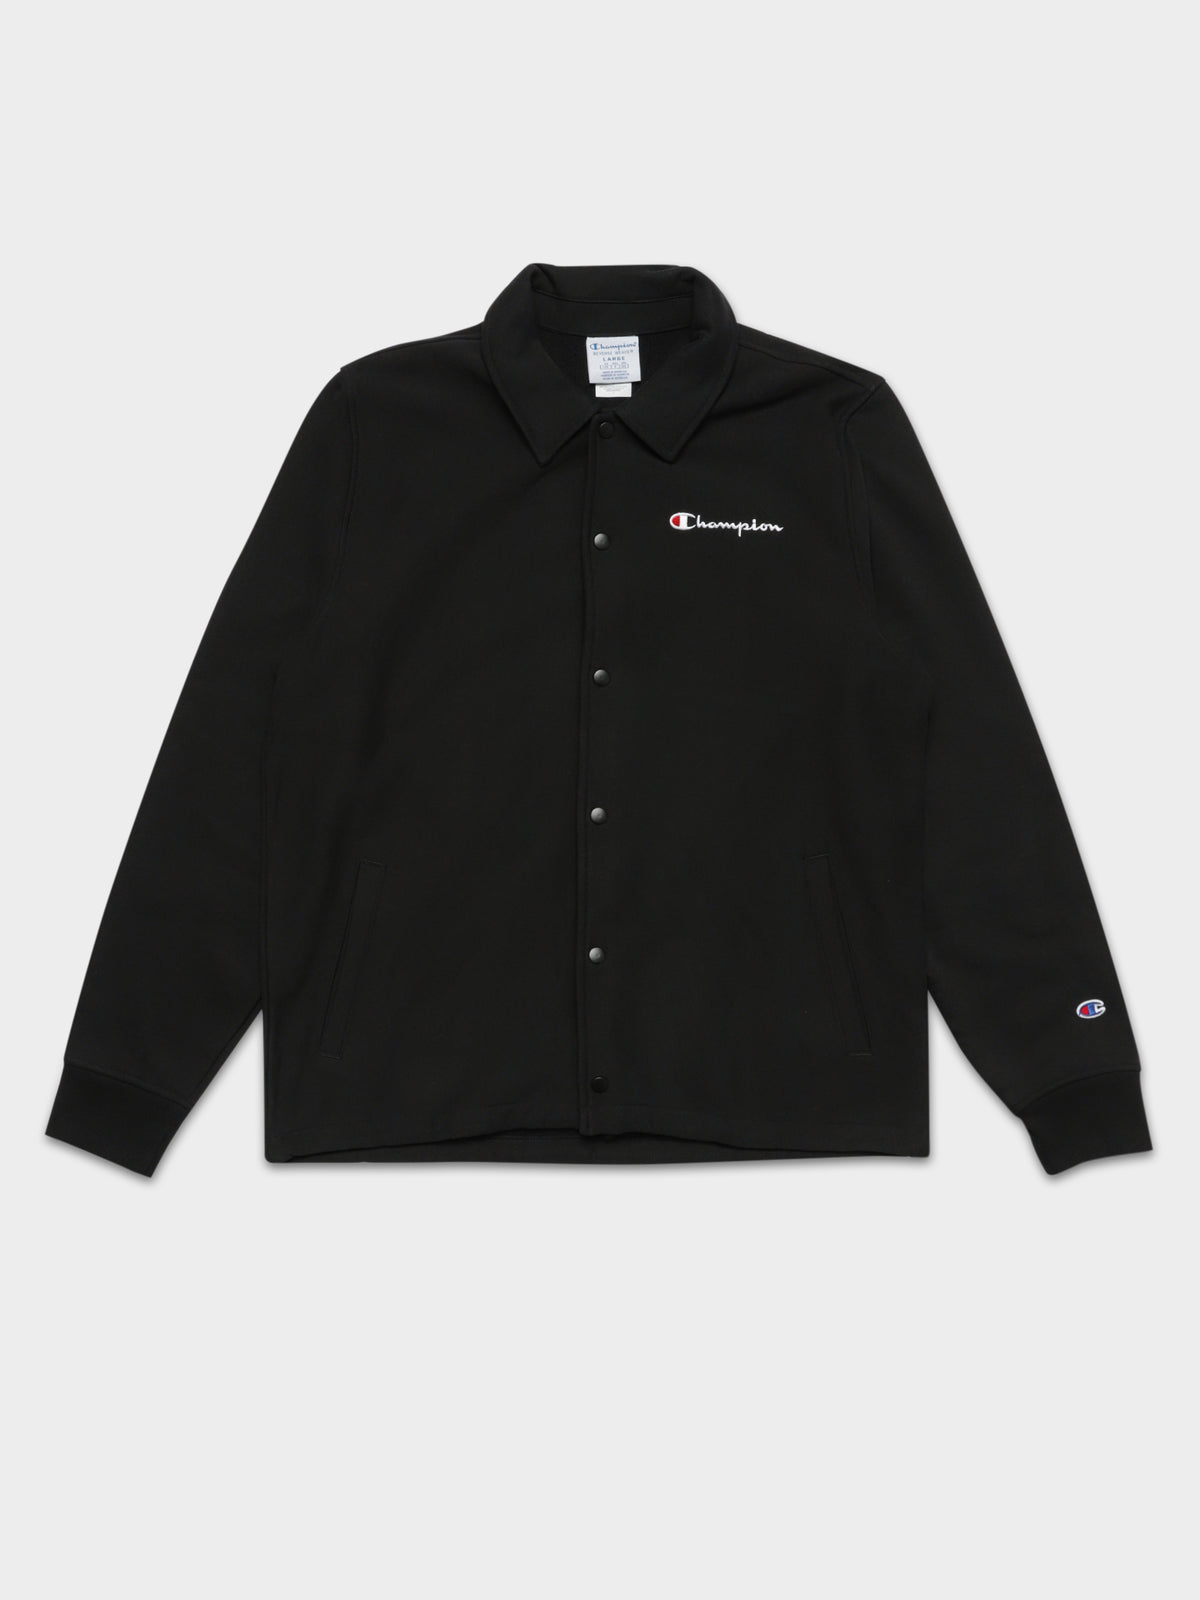 Reverse Weave Coaches Jacket in Black